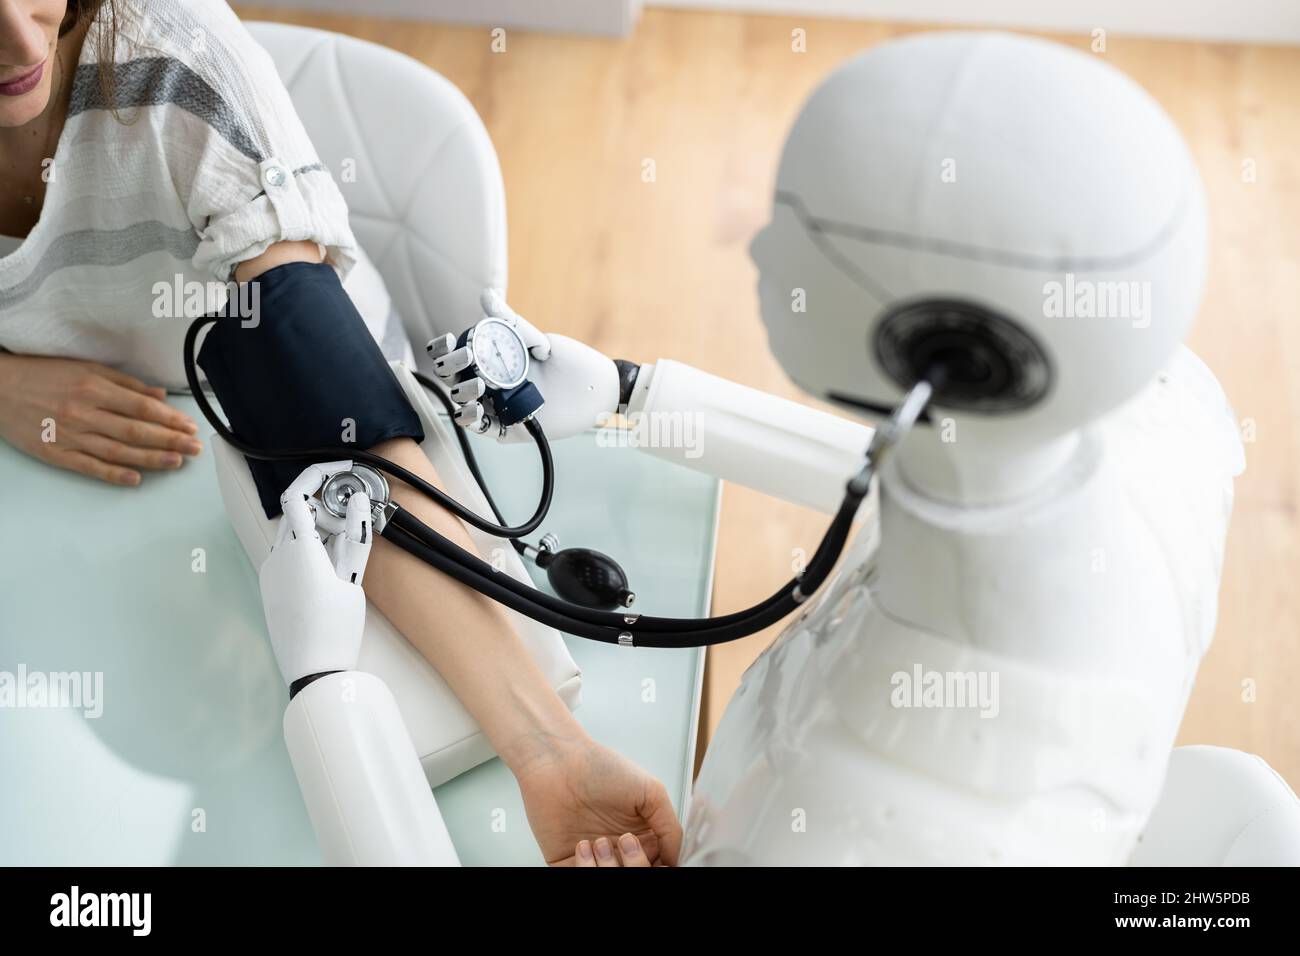 Blood Pressure Health Check By Robot Doctor Stock Photo